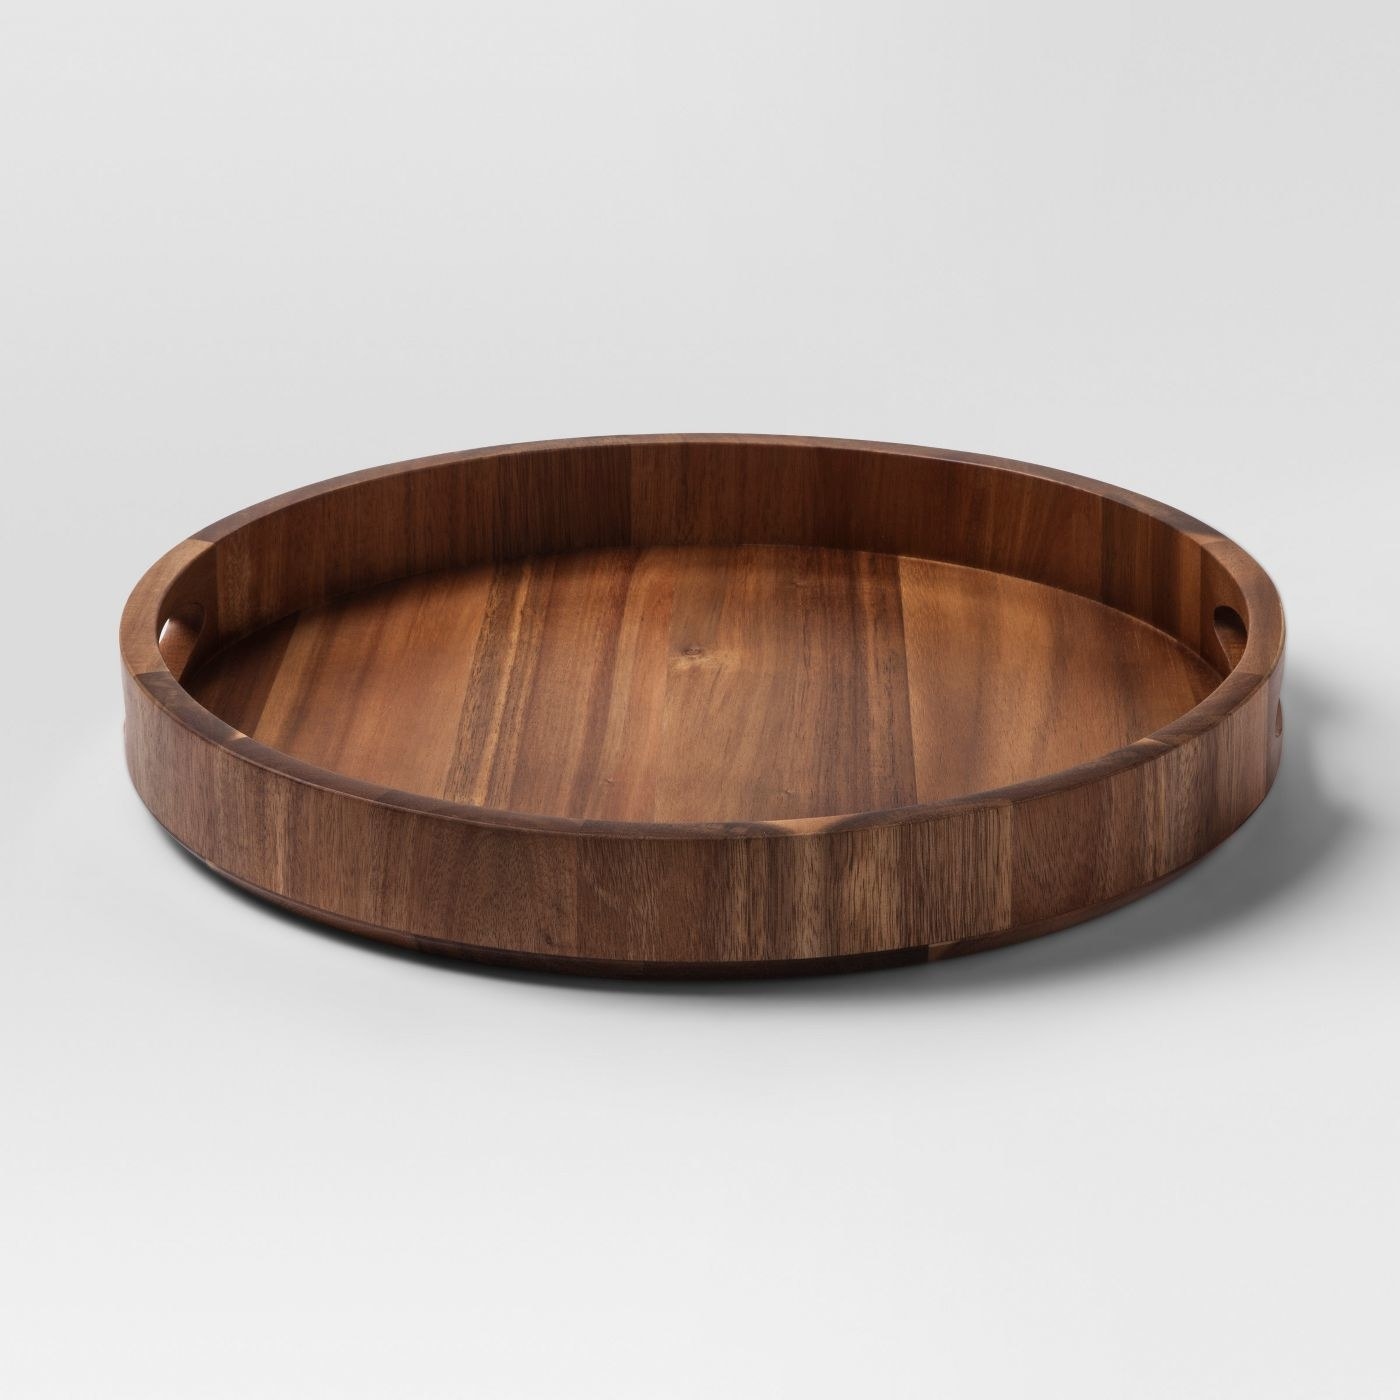 the wooden tray